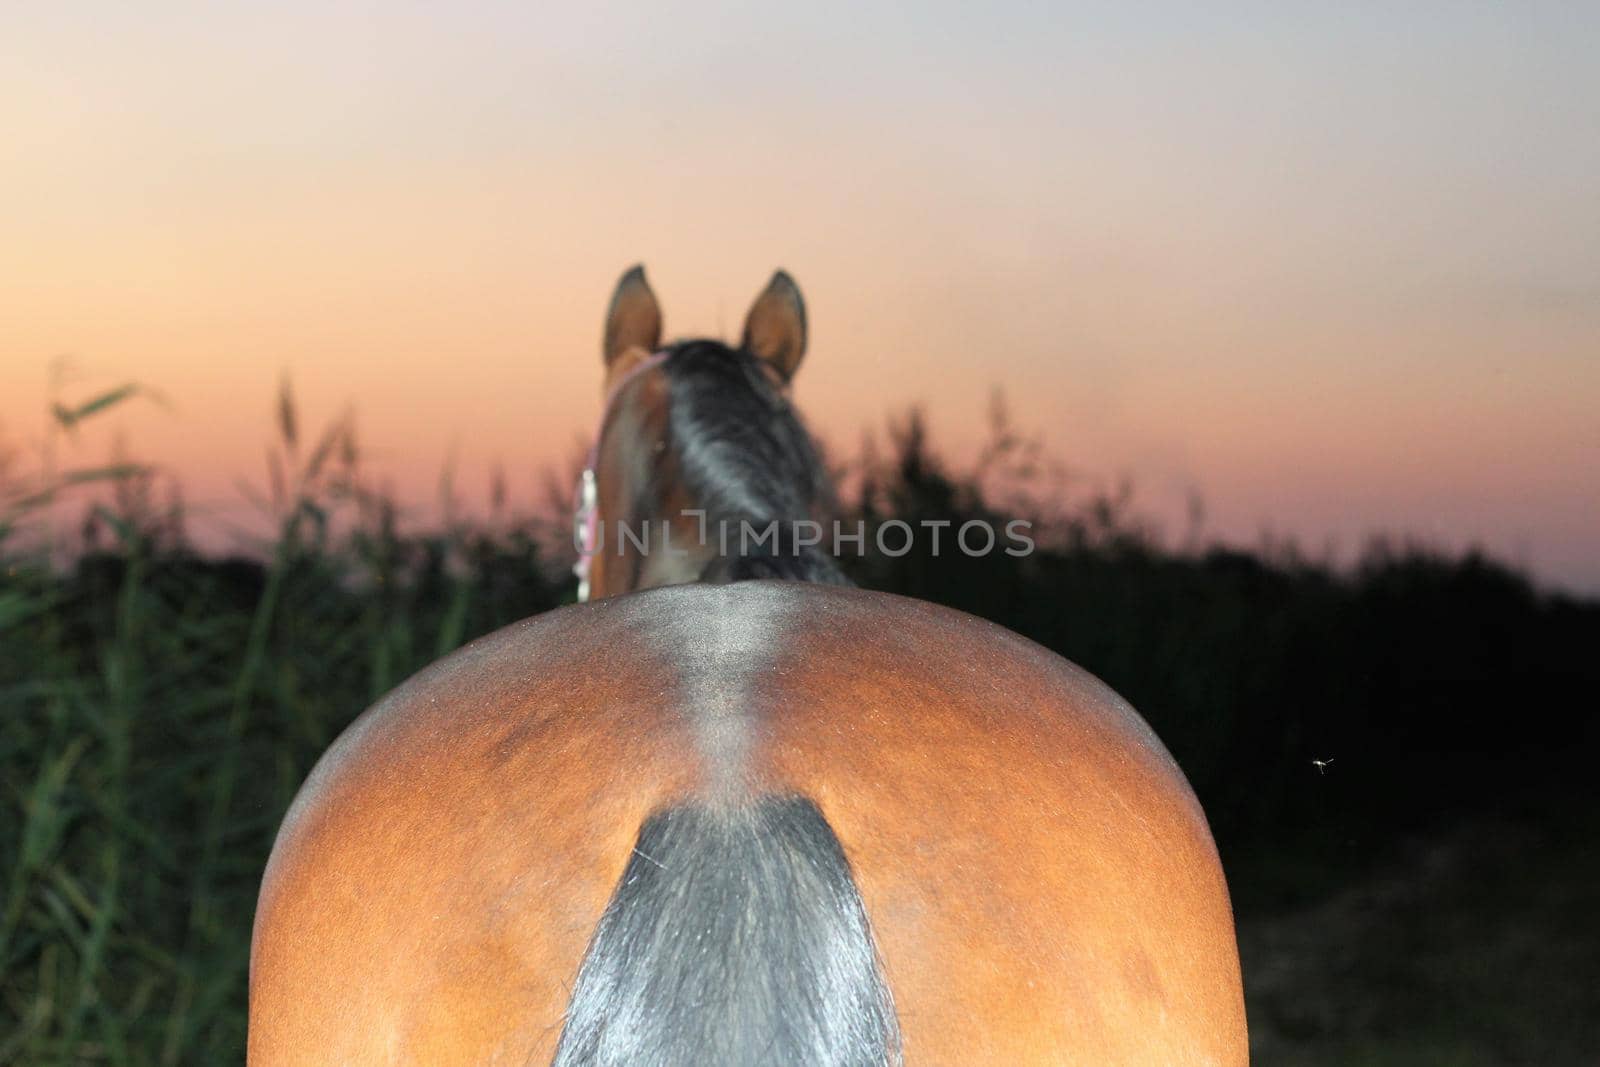 Colourful sunset with the rearview of a horse and reeds in the foreground by Luise123